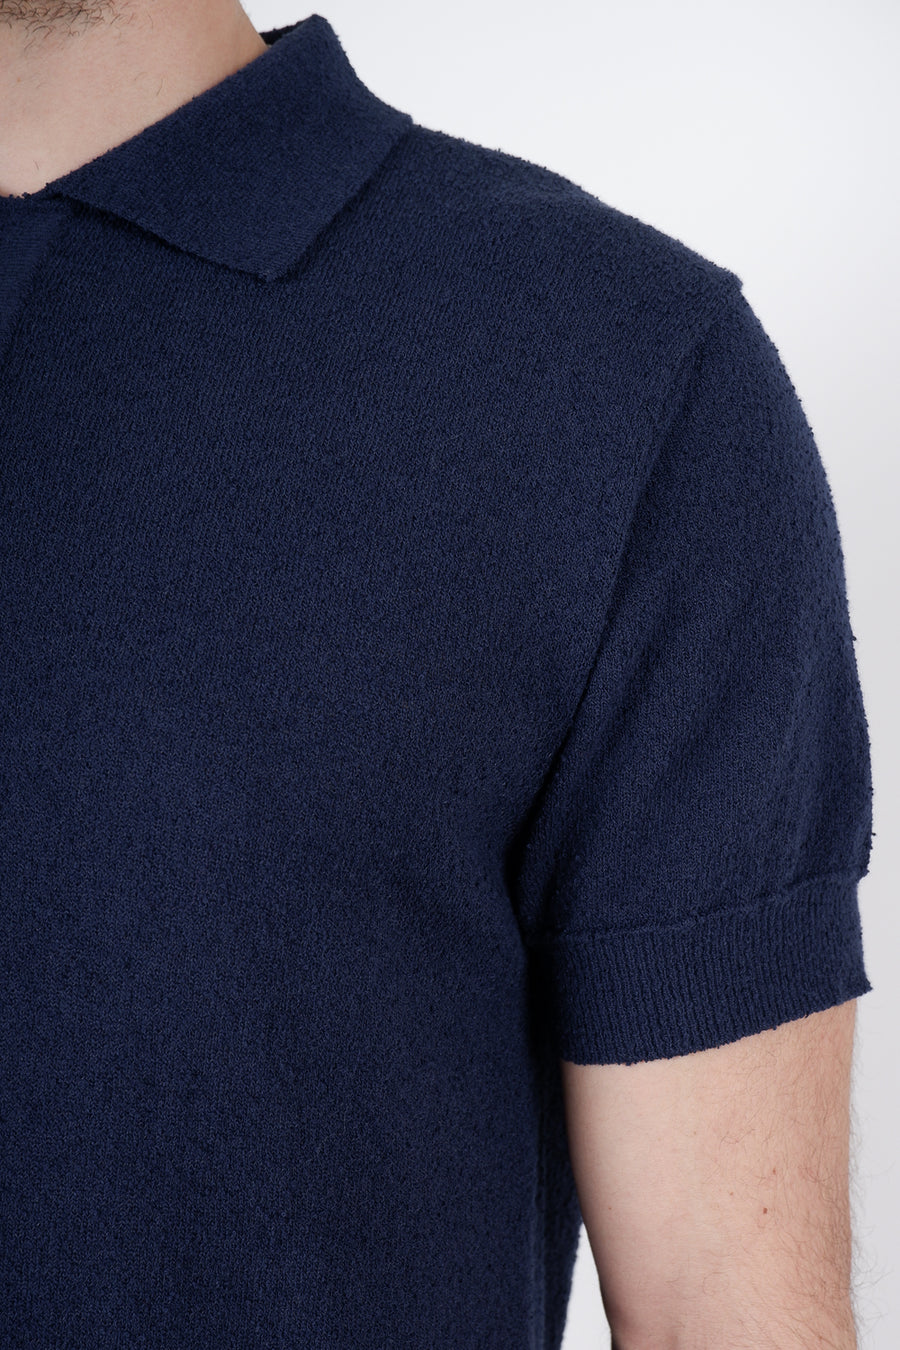 Buy the Daniele Fiesoli Polo Neck T-Shirt in Navy at Intro. Spend £50 for free UK delivery. Official stockists. We ship worldwide.